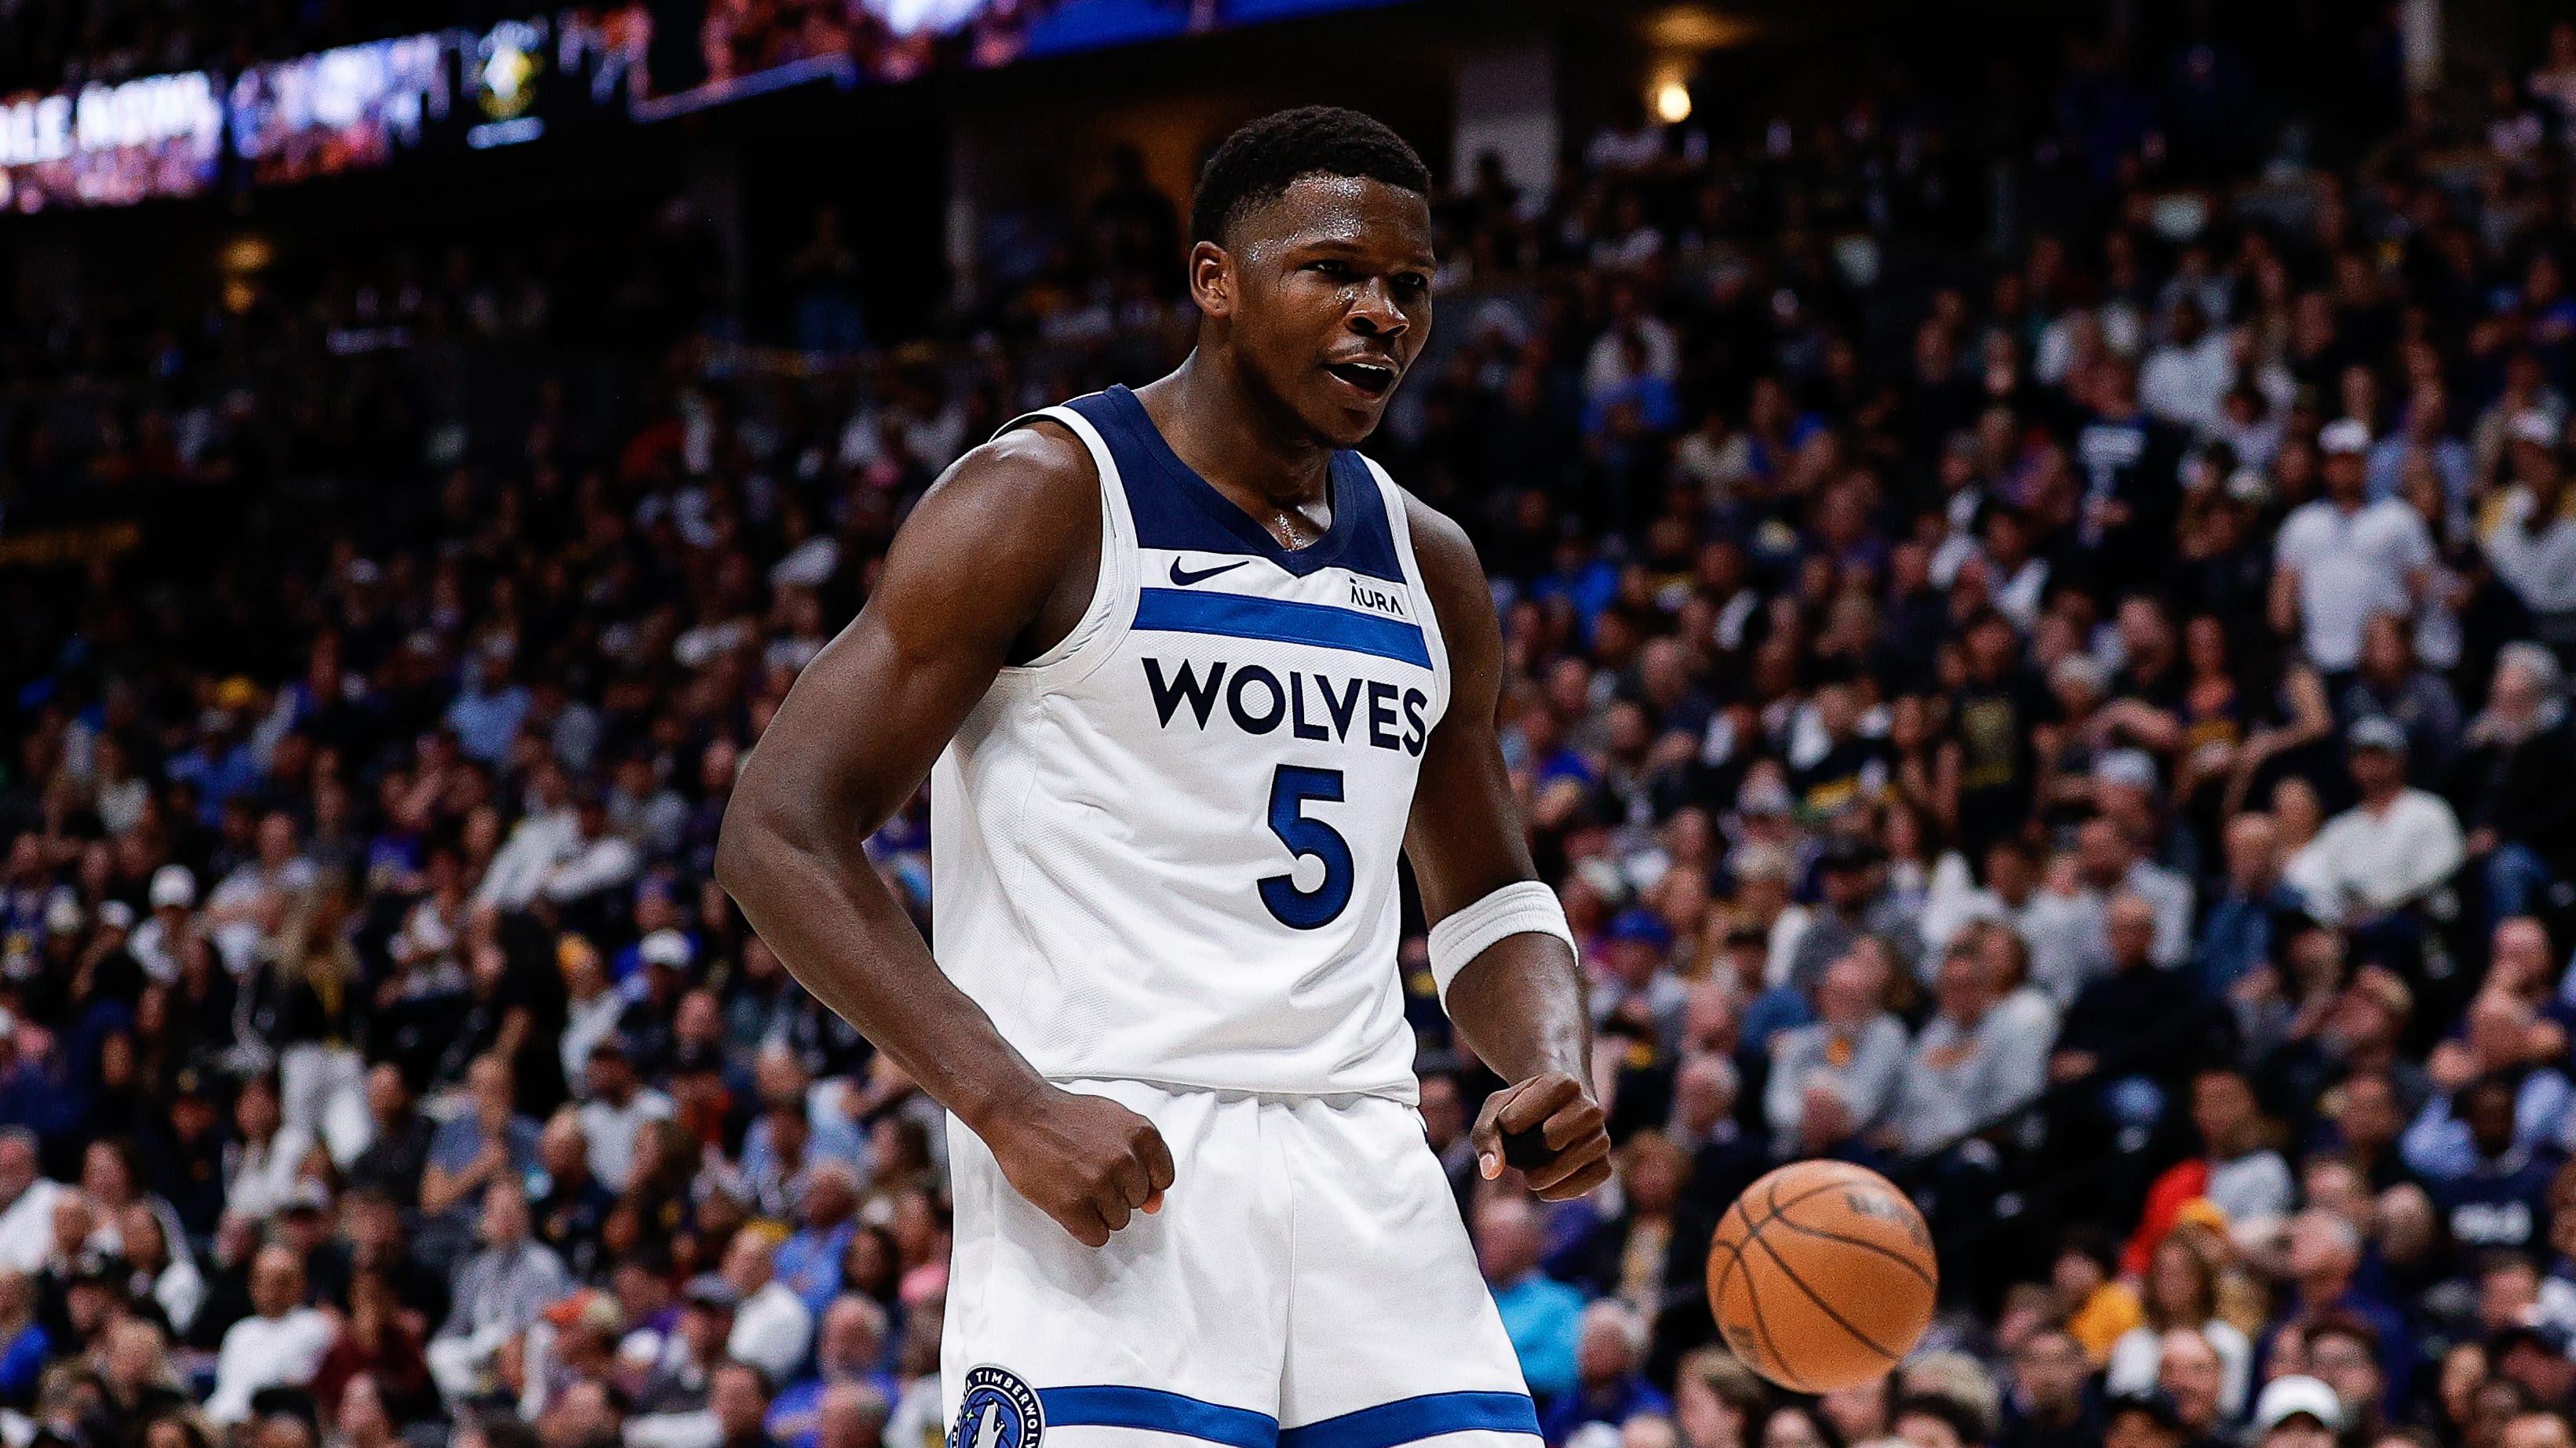 Timberwolves put on defensive masterclass, dismantle Nuggets in Game 2